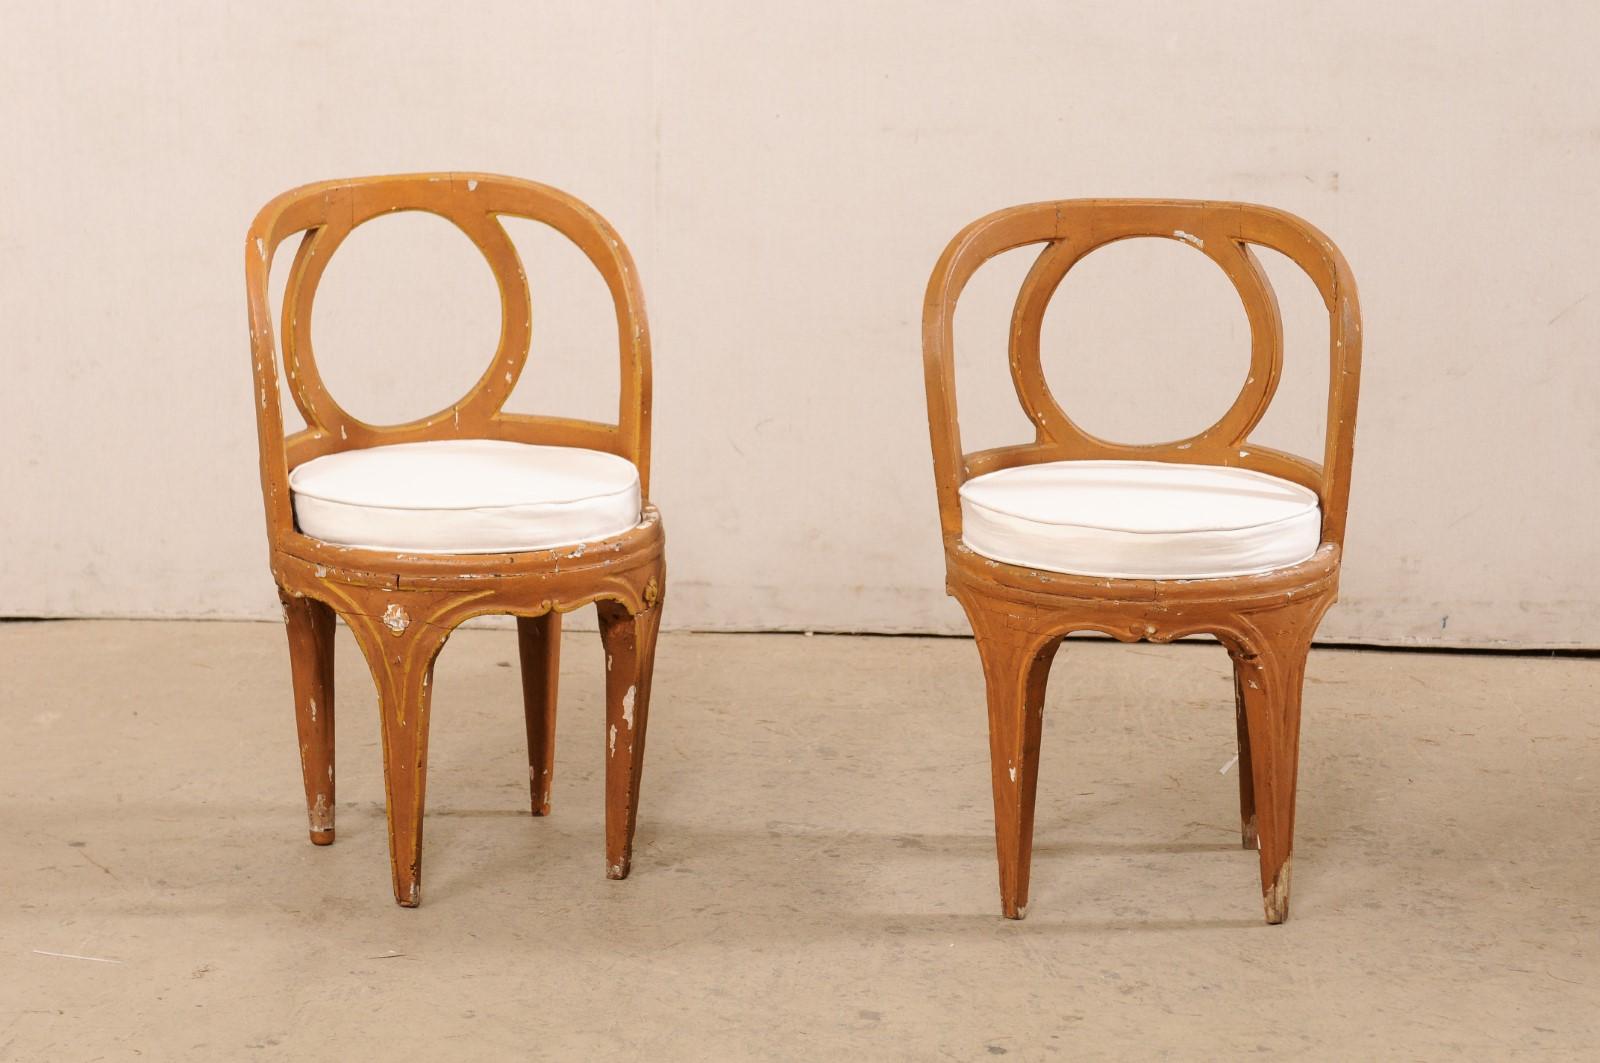 A Venetian pair of rounded and carved-wood accent chairs from the 18th century. This antique pair of Venetian chairs from Italy each have round-shaped seats with rounded back set with circular back-splat at center, and raised on four tapering legs